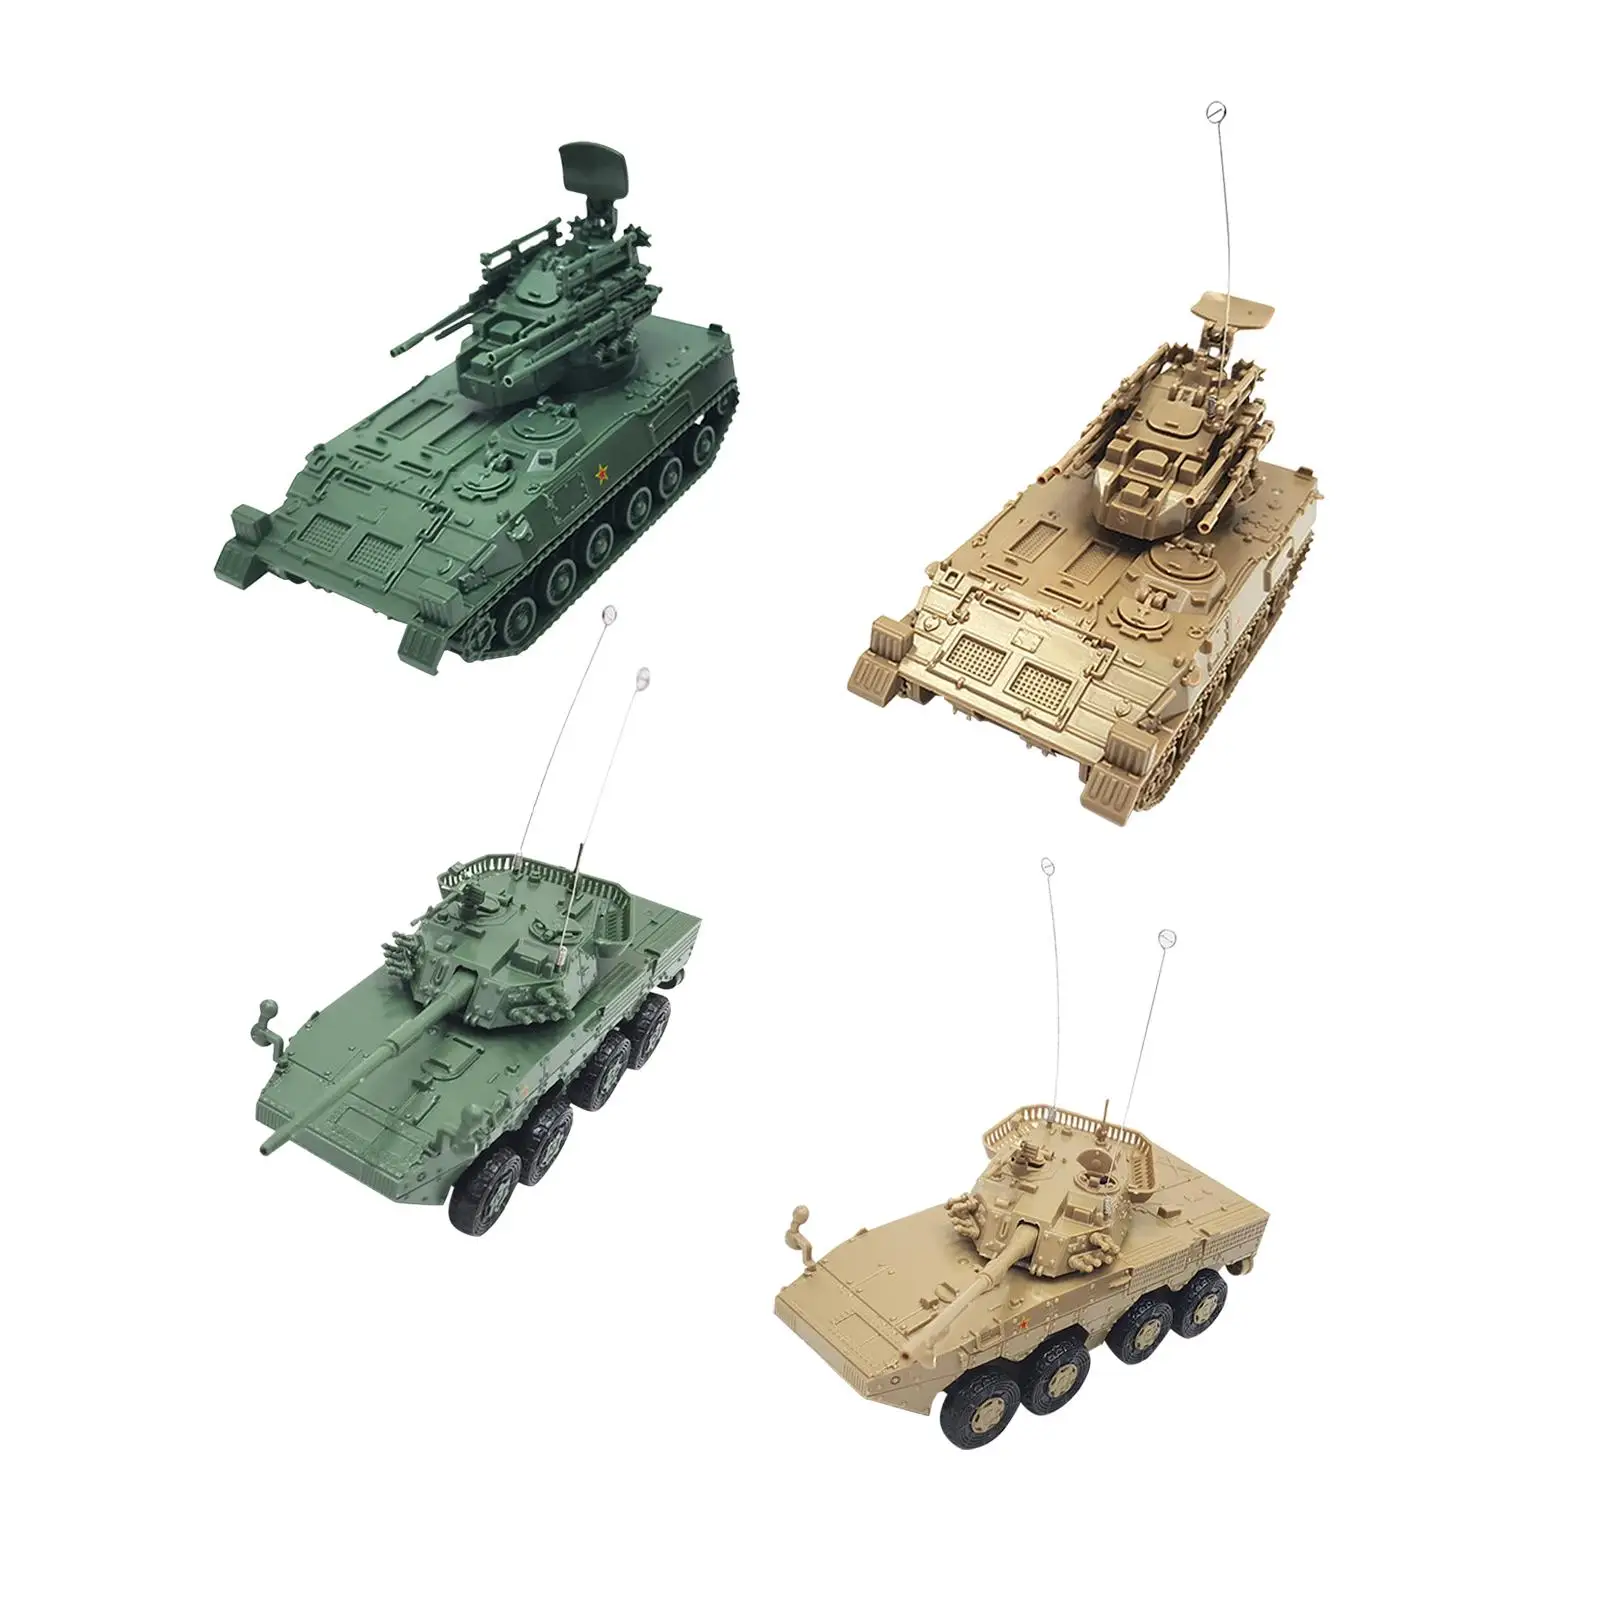 1/72 Armored Tank Model Crafts Building Model Armored Vehicles for Tabletop Decor Table Scene Education Toy Adults Party Favors